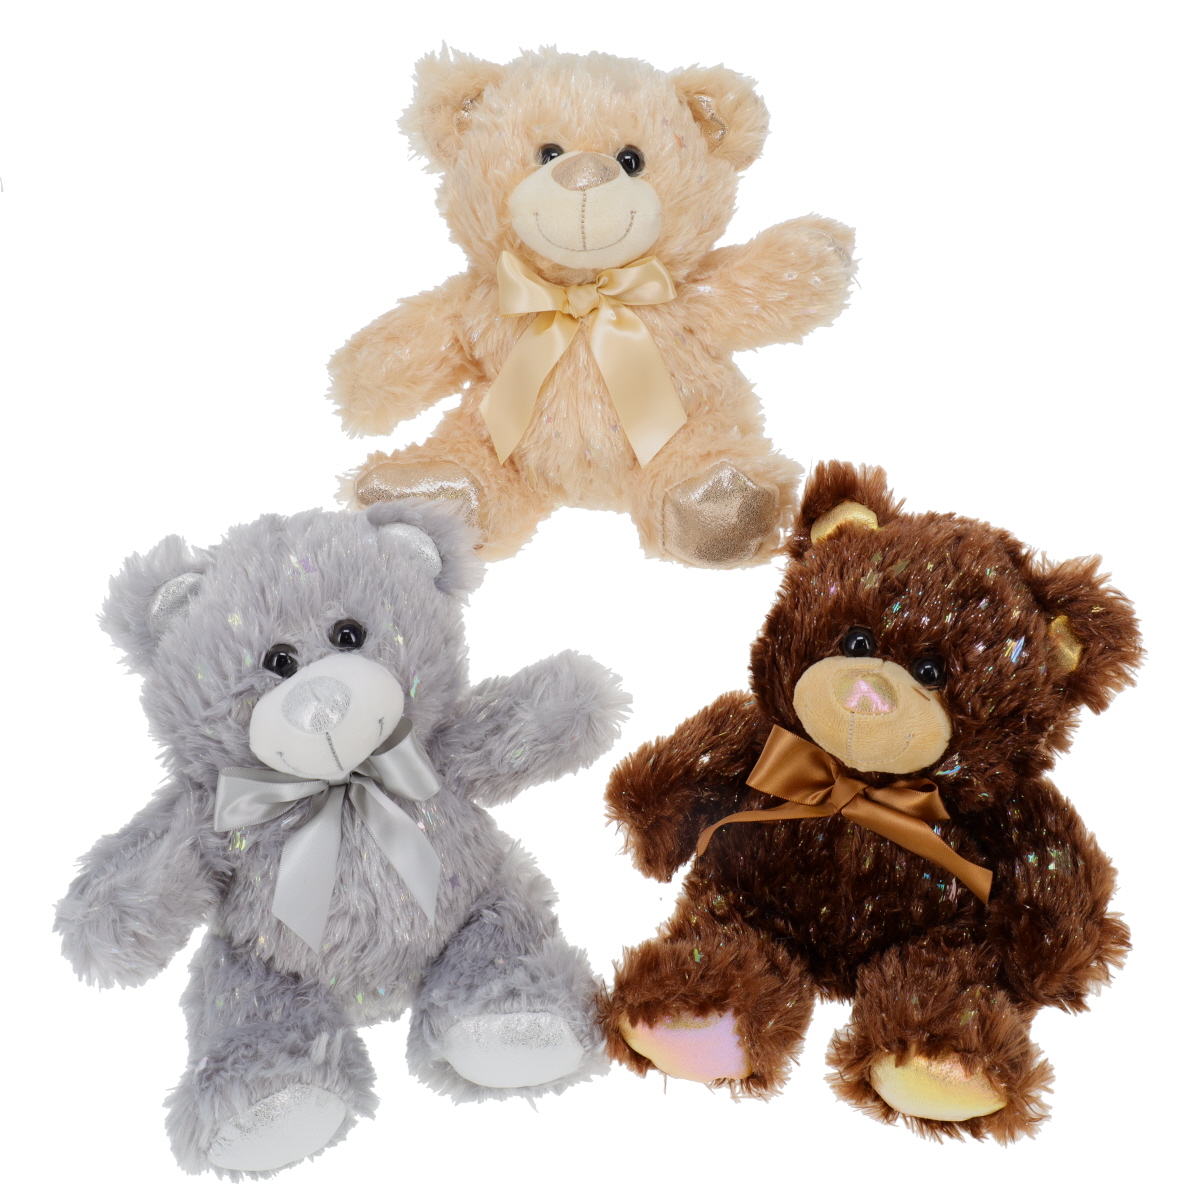 Treasure Cove K1411285 Plush 8.5-Inch Bear Stuffed Toy Cuddly Critter Gift Playtime Assorted